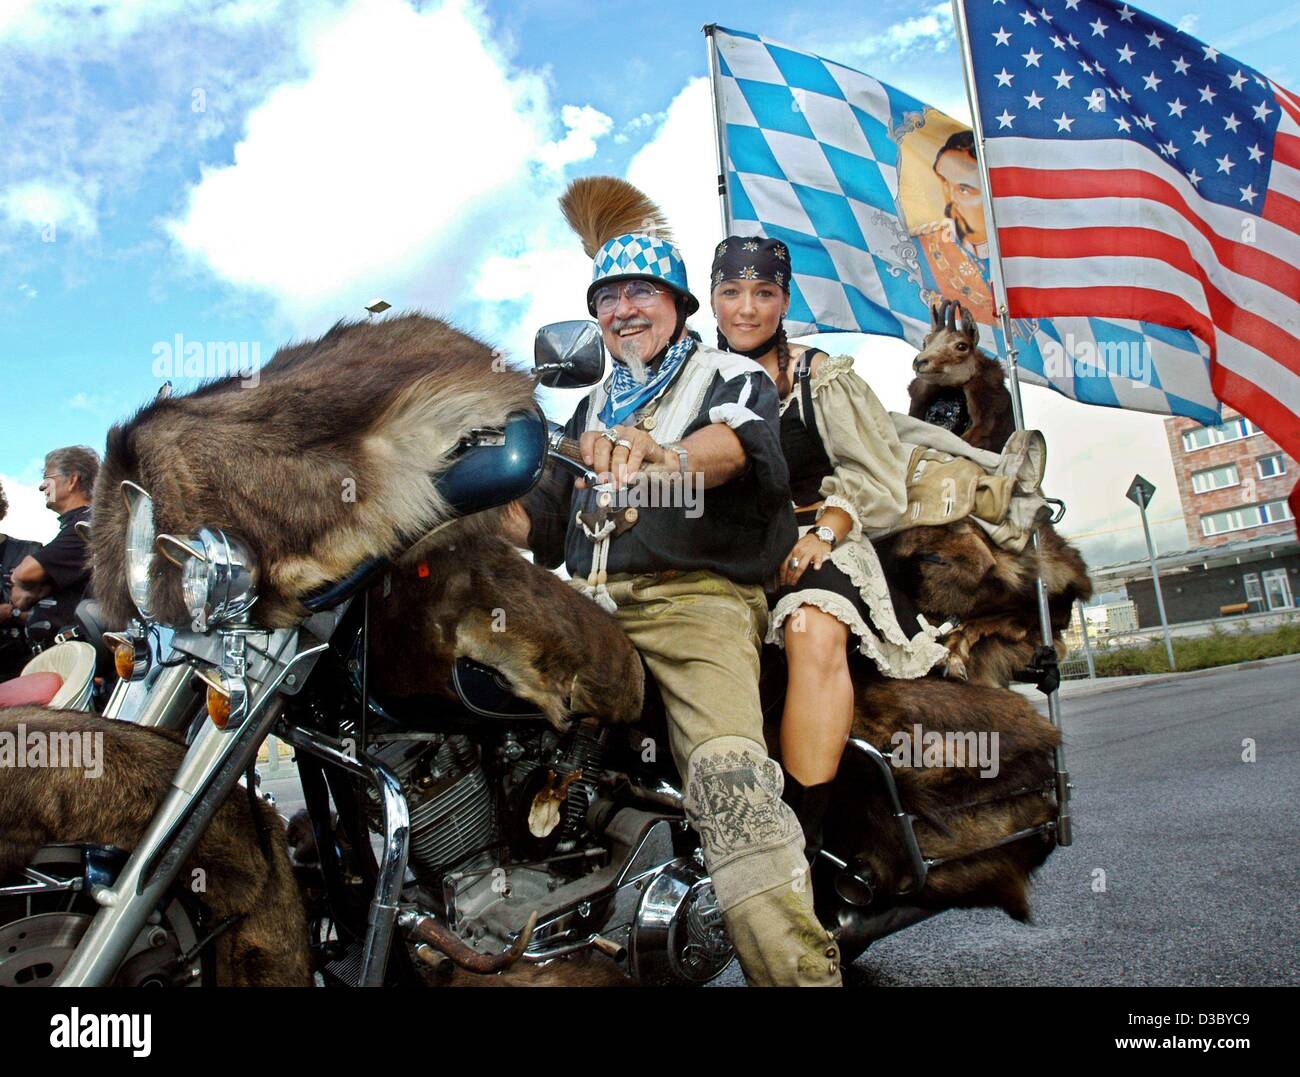 Biker Edgar Dinkel (L) from Munich and his daughter Sabine ride on their Harley, which is adorned with all sorts of fur accessories,  the Bavarian and American flag, during the Harley Davidson parade through Hamburg, Germany, 27 July 2003. The parade was the climax of the three-day event for the 100 Stock Photo